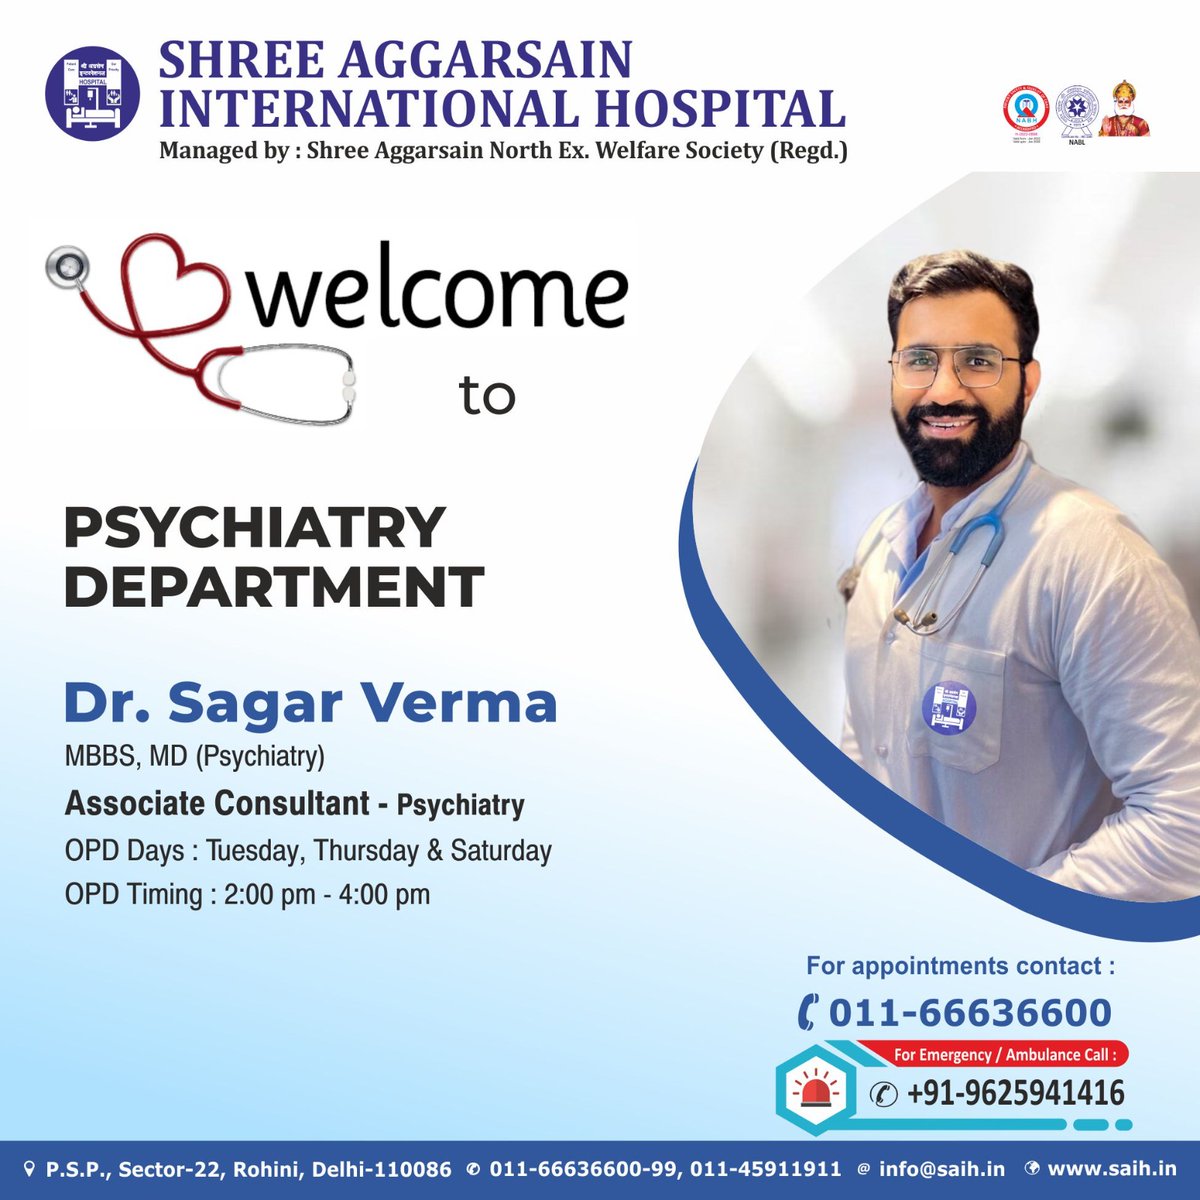 Dr. Sagar Verma has joined as Associate Consultant in the department of Psychiatry. We are extremely pleased to have you on board. 
#PsychiatryCare #psychiatricdisorders #Deaddiction #psychosisawareness #DepressionAndAnxietyAwareness #sleepdisordertreatment